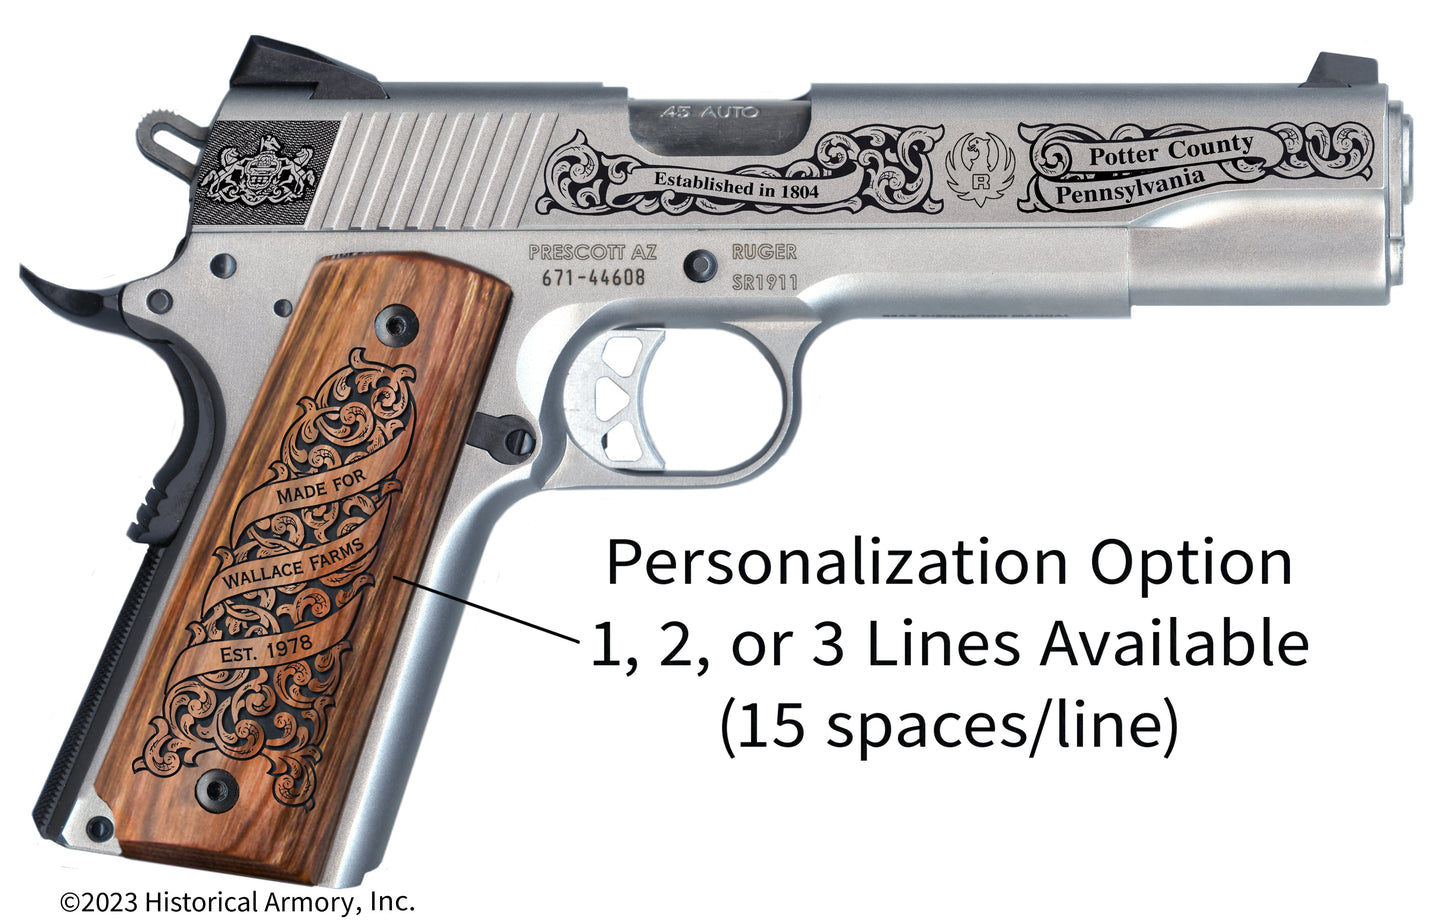 Potter County Pennsylvania Personalized Engraved .45 Auto Ruger 1911